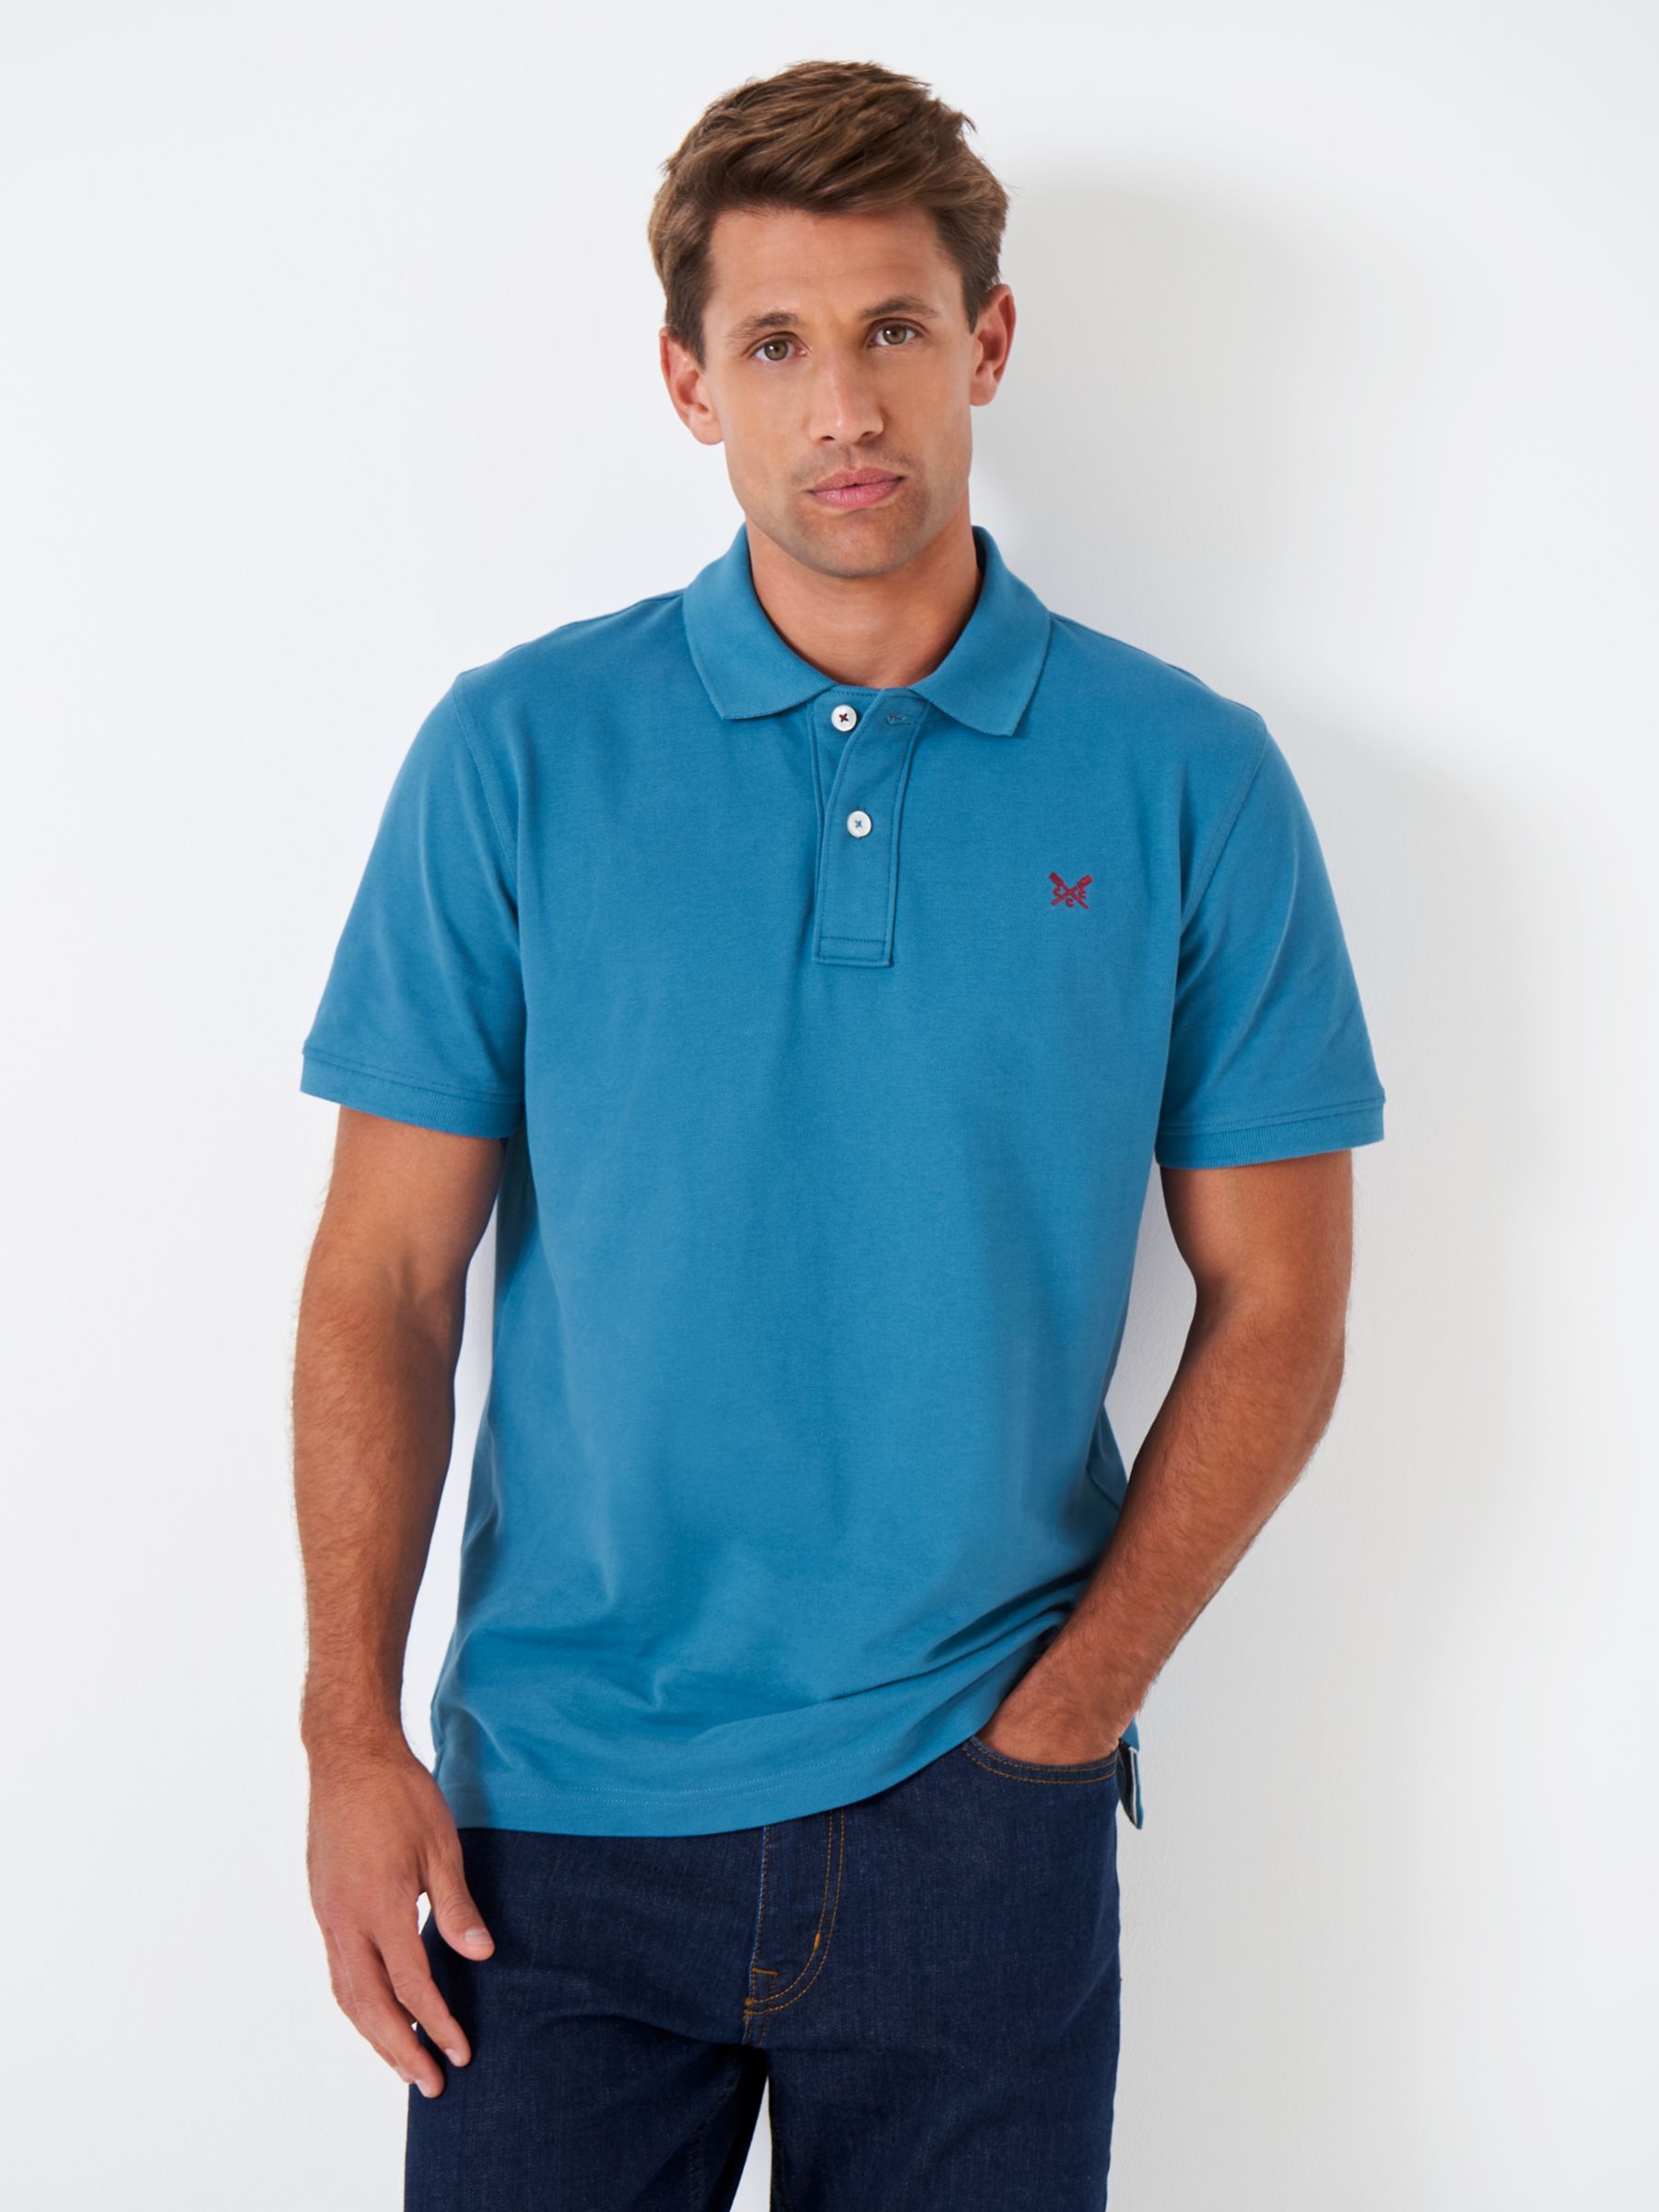 Crew Clothing Classic Pique Polo Shirt, Blue at John Lewis & Partners